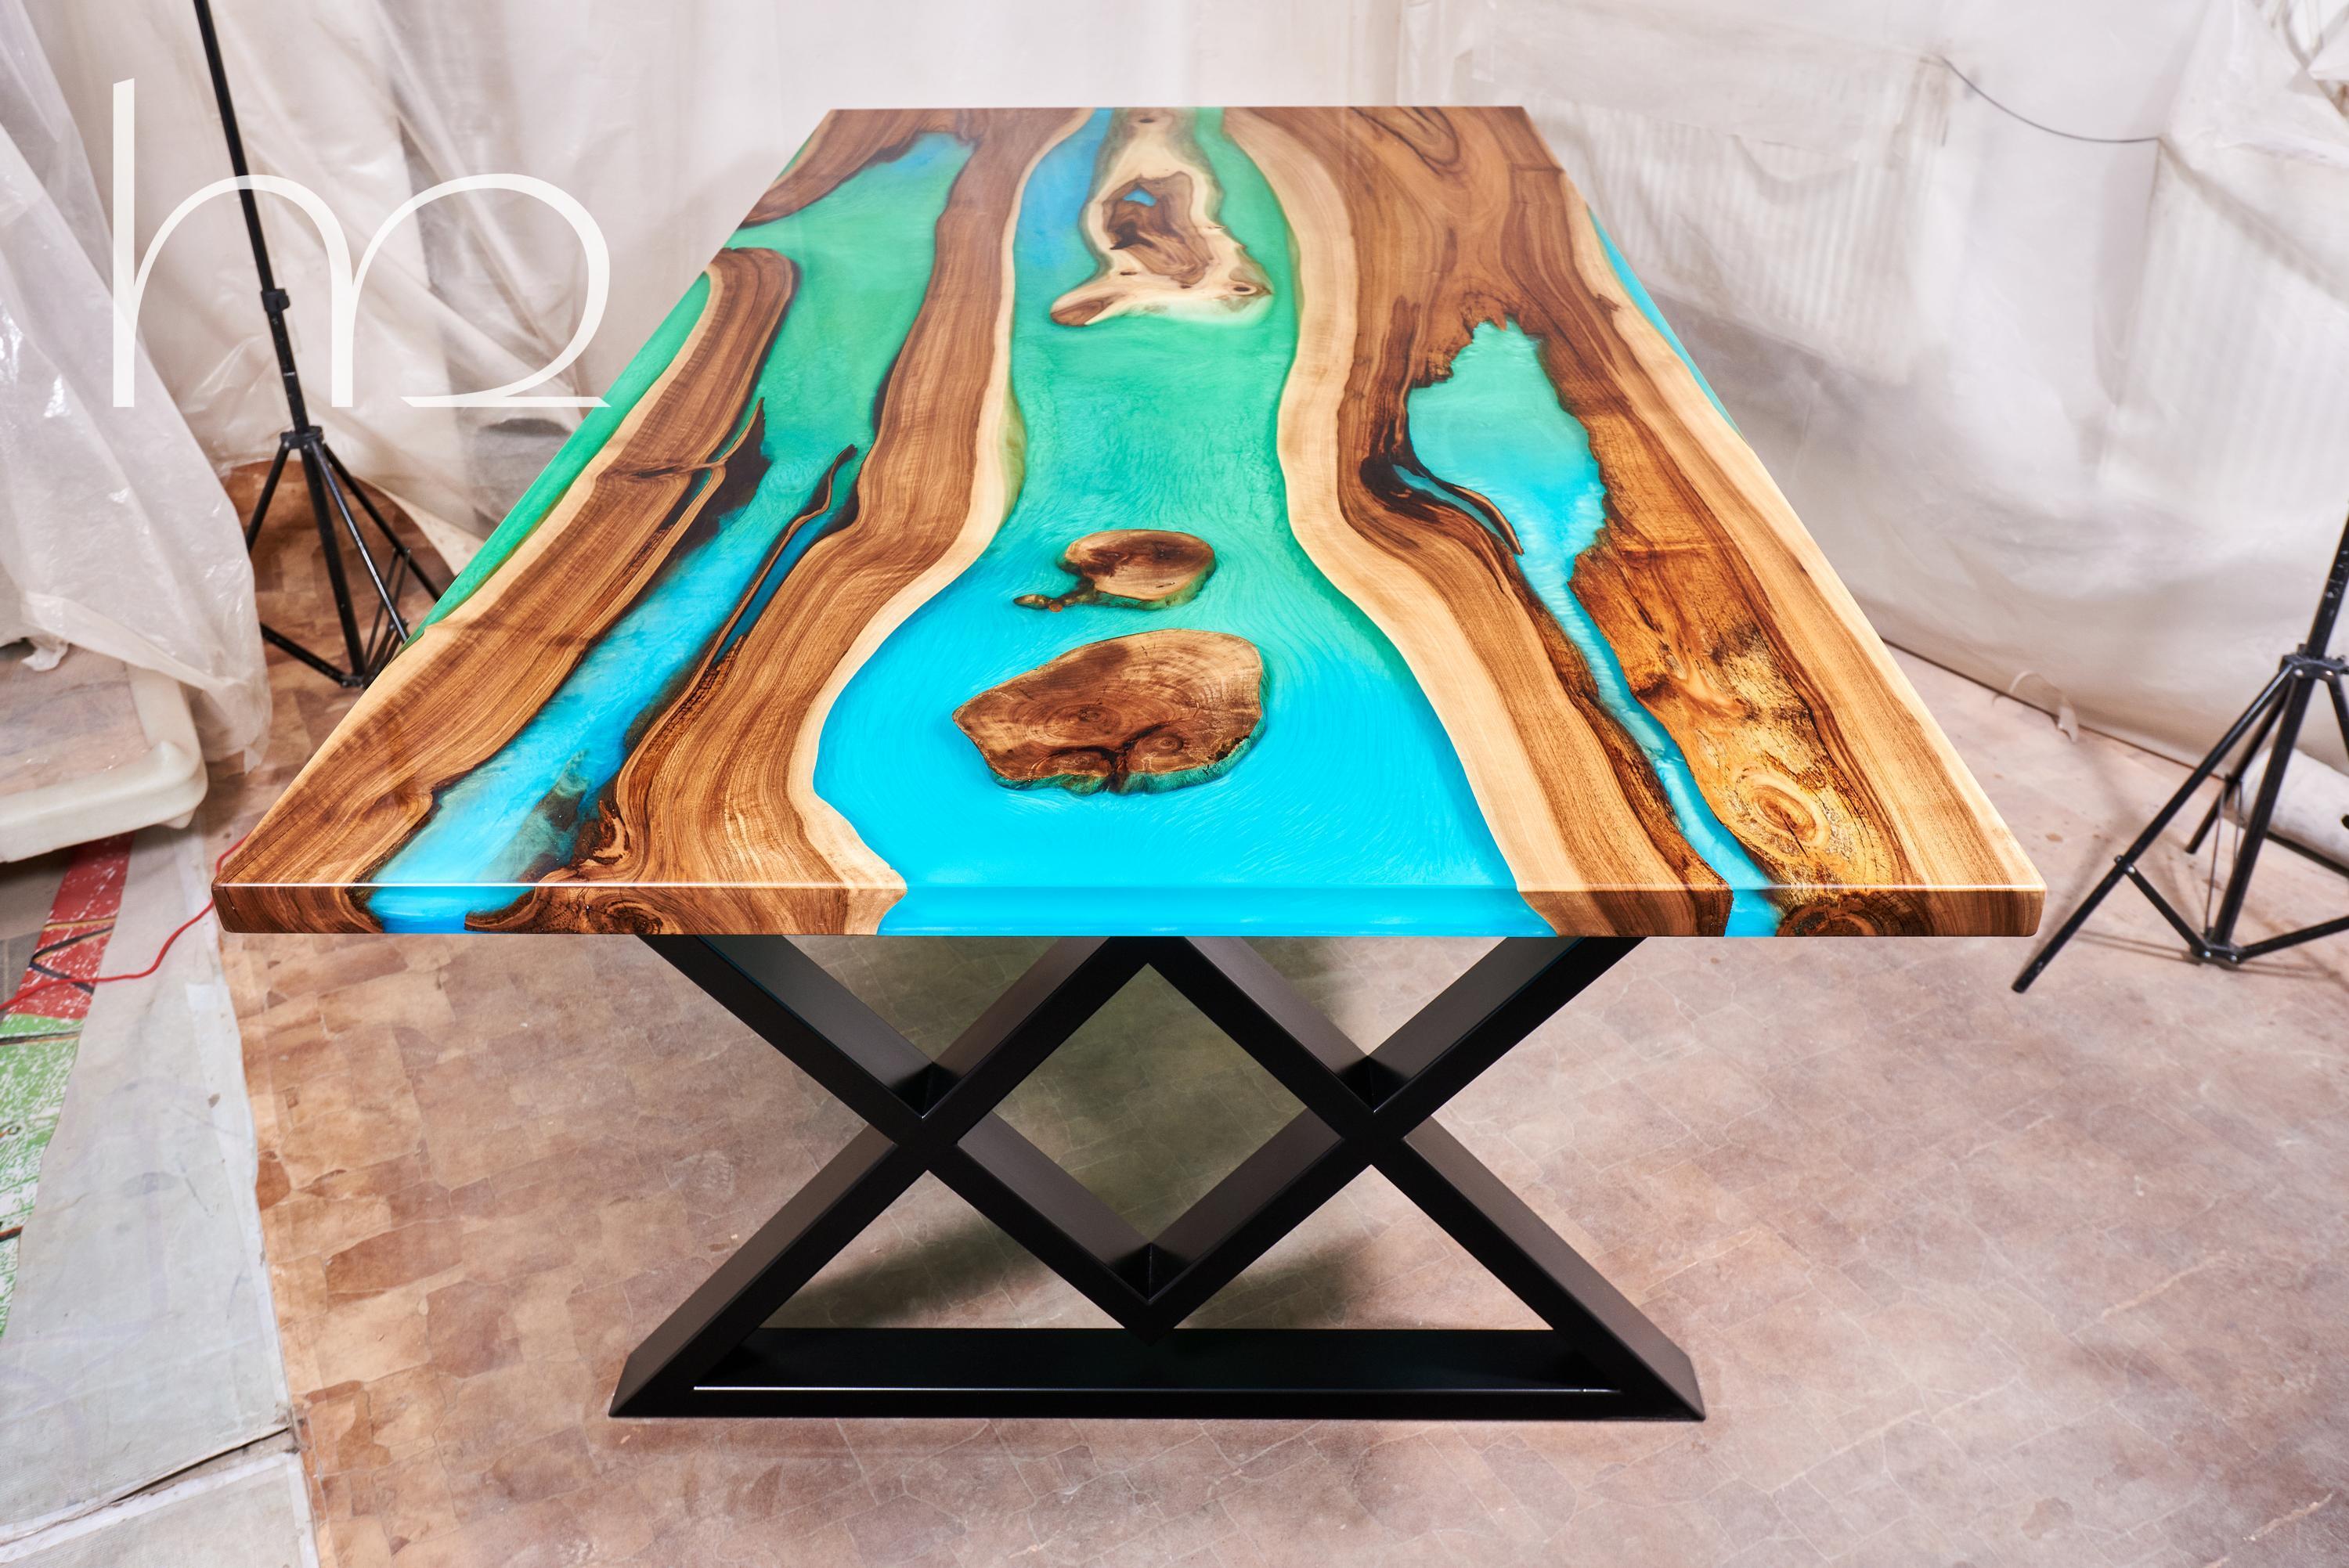 The table used 3 slabs of old walnut. Many parts were rotten before cleaning. We tried to leave everything possible. This table also has a story.

Sometimes we go through difficult circumstances. But isn't it a miracle that as time passes, we find